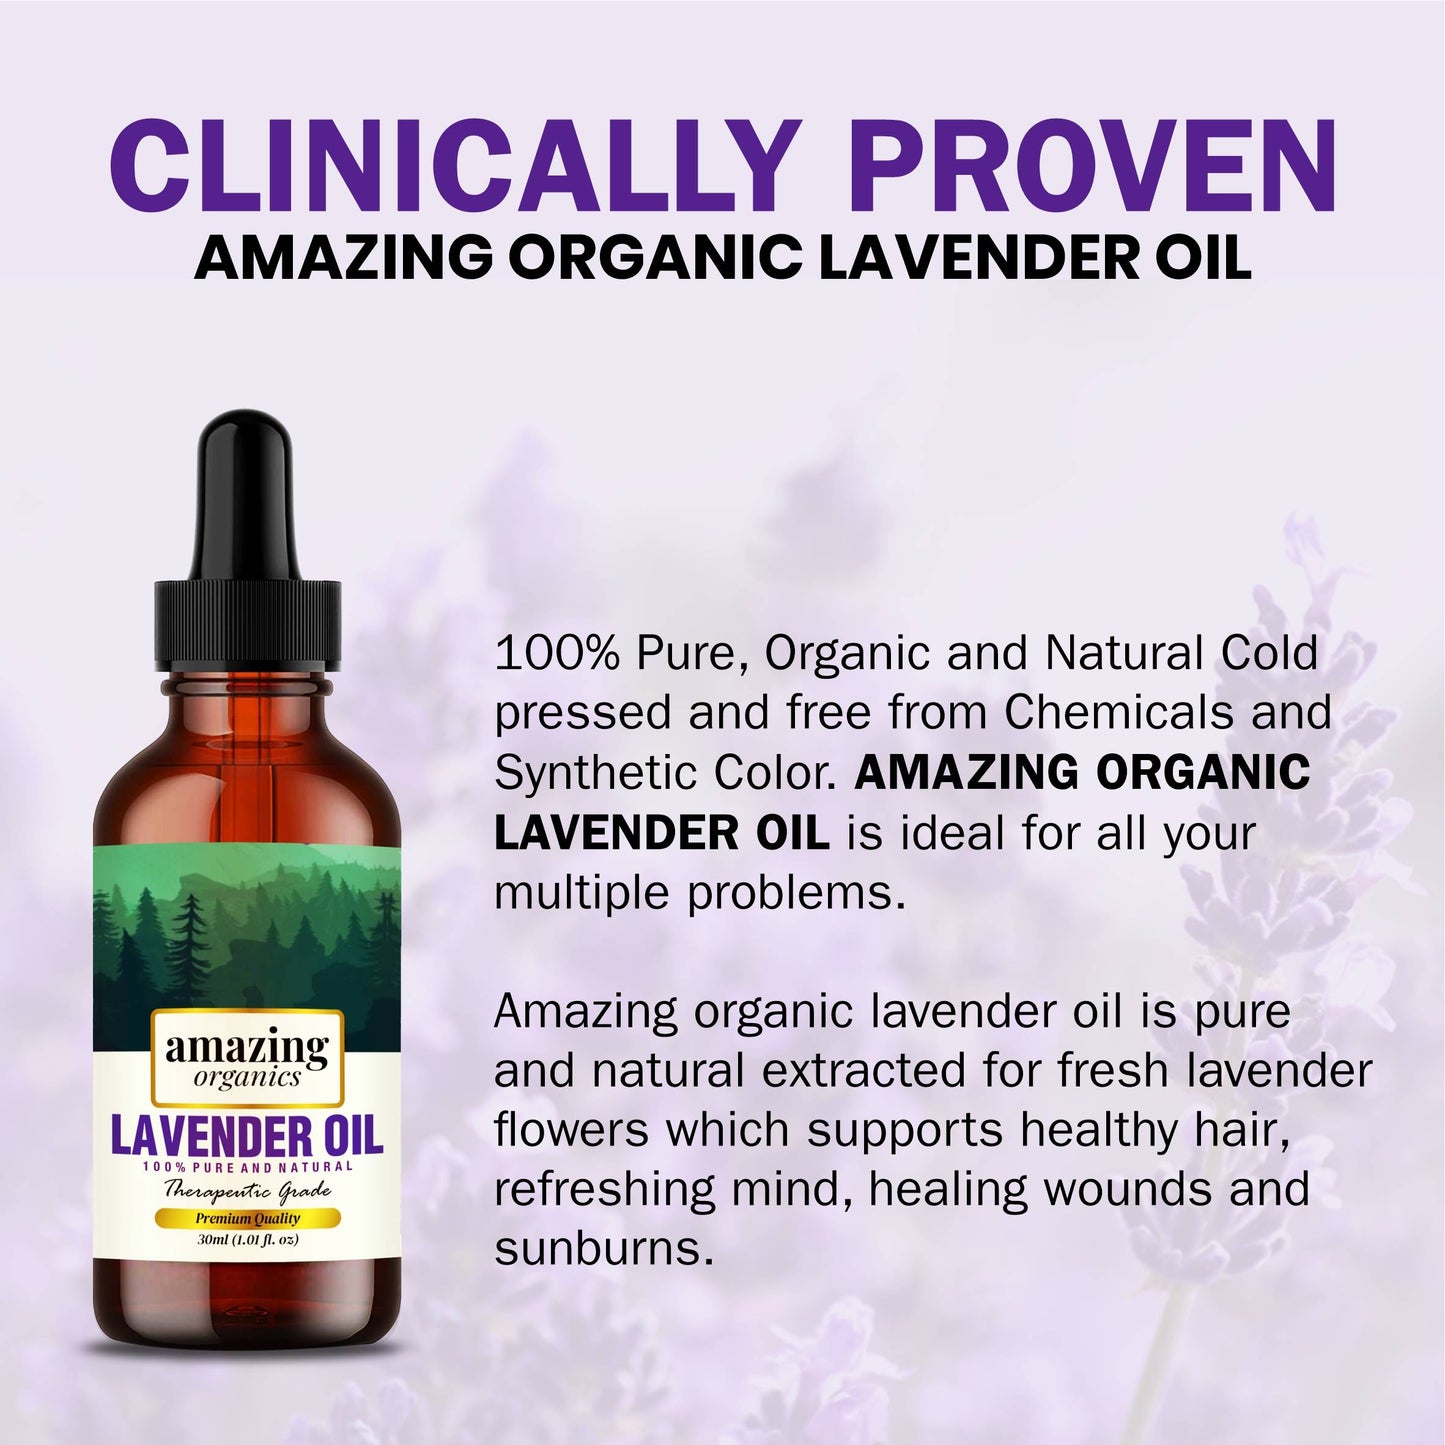 Lavender Essential Oil for Aroma Therapy, Stress Relief, Hair, Skin & Sleep